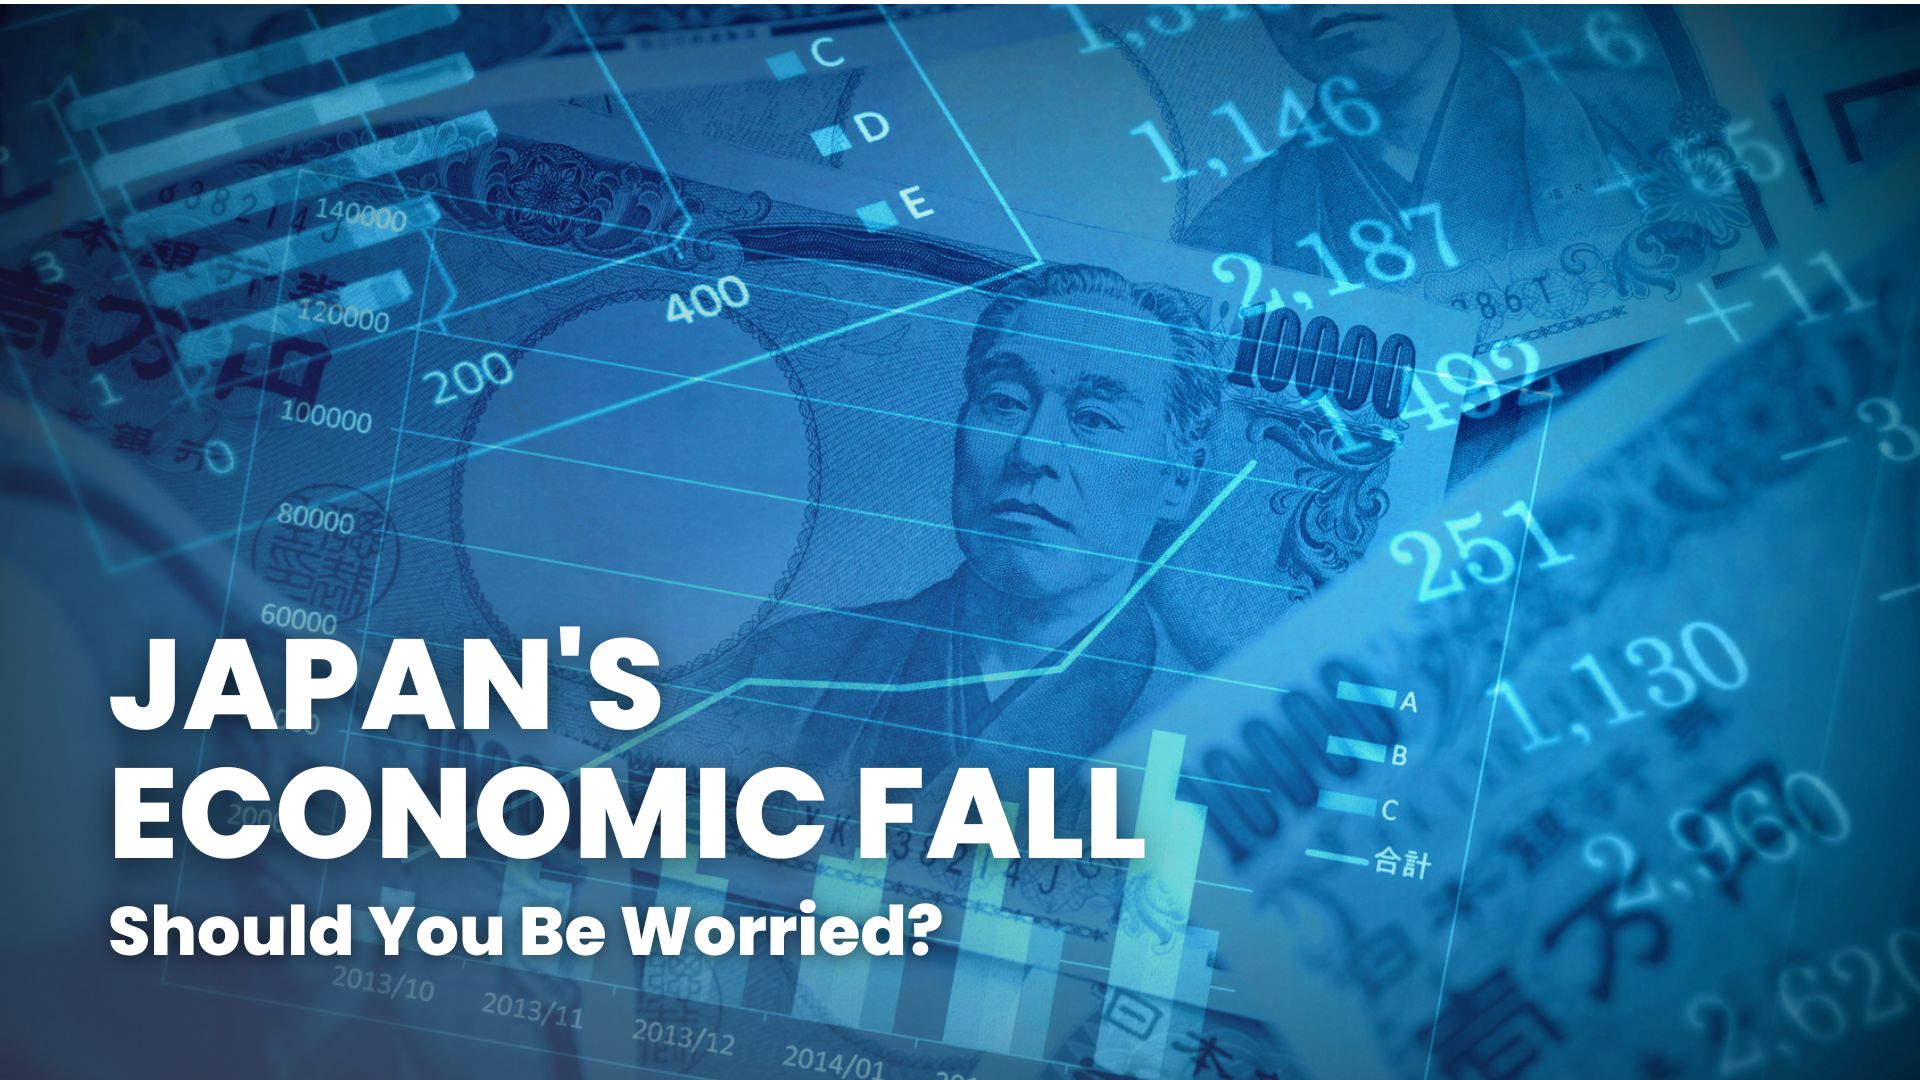 Japan’s Economic Fall: Should You Be Worried?